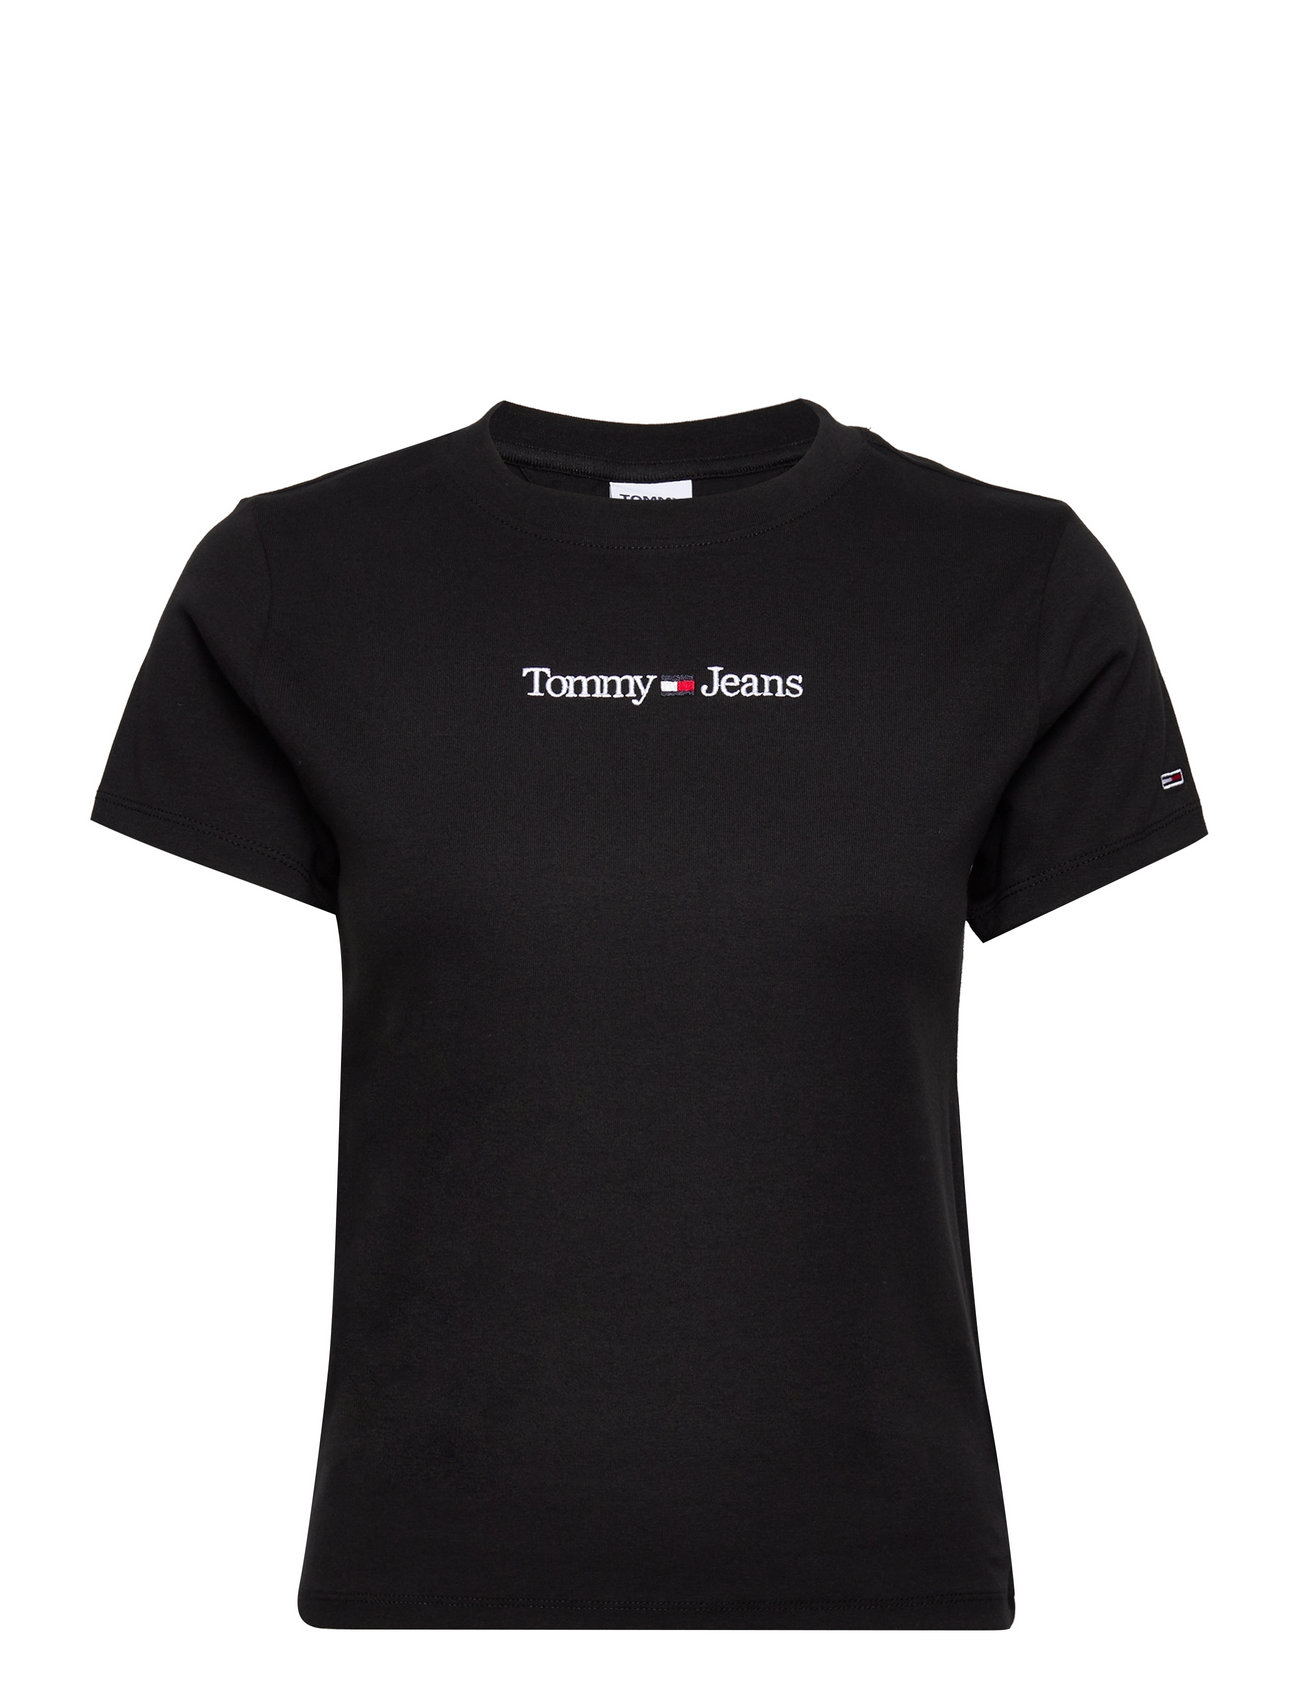 Tommy Jeans Tjw – Booztlet Bby – Serif Ss tops t-shirts & at shop Linear